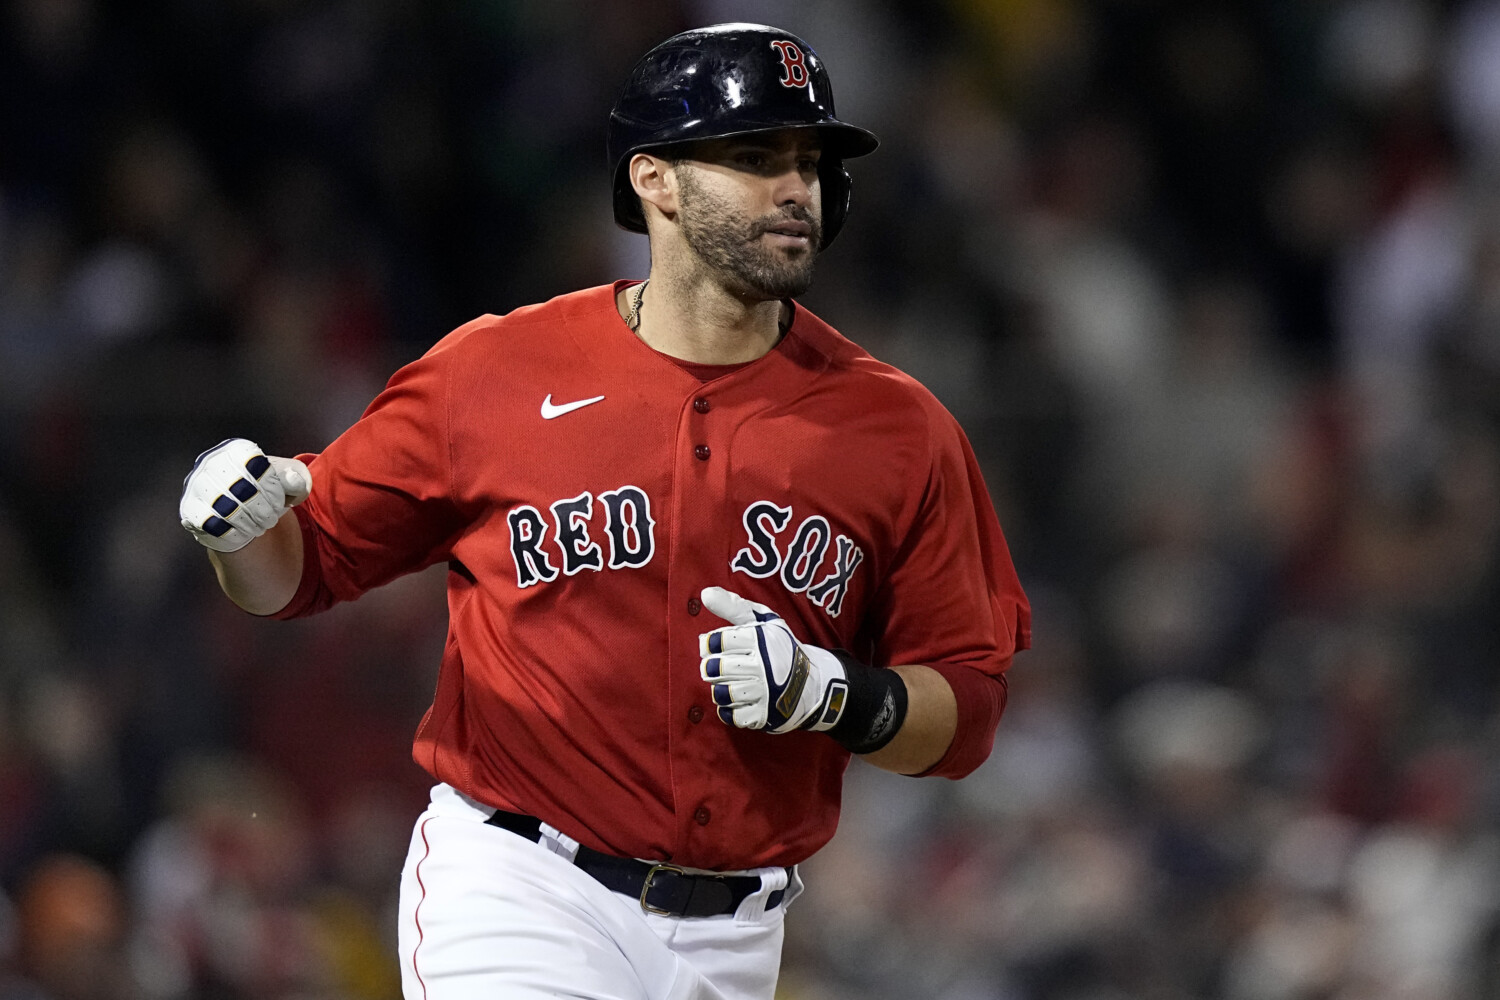 J.D. Martinez says he's 'probably not' opting out of his contract